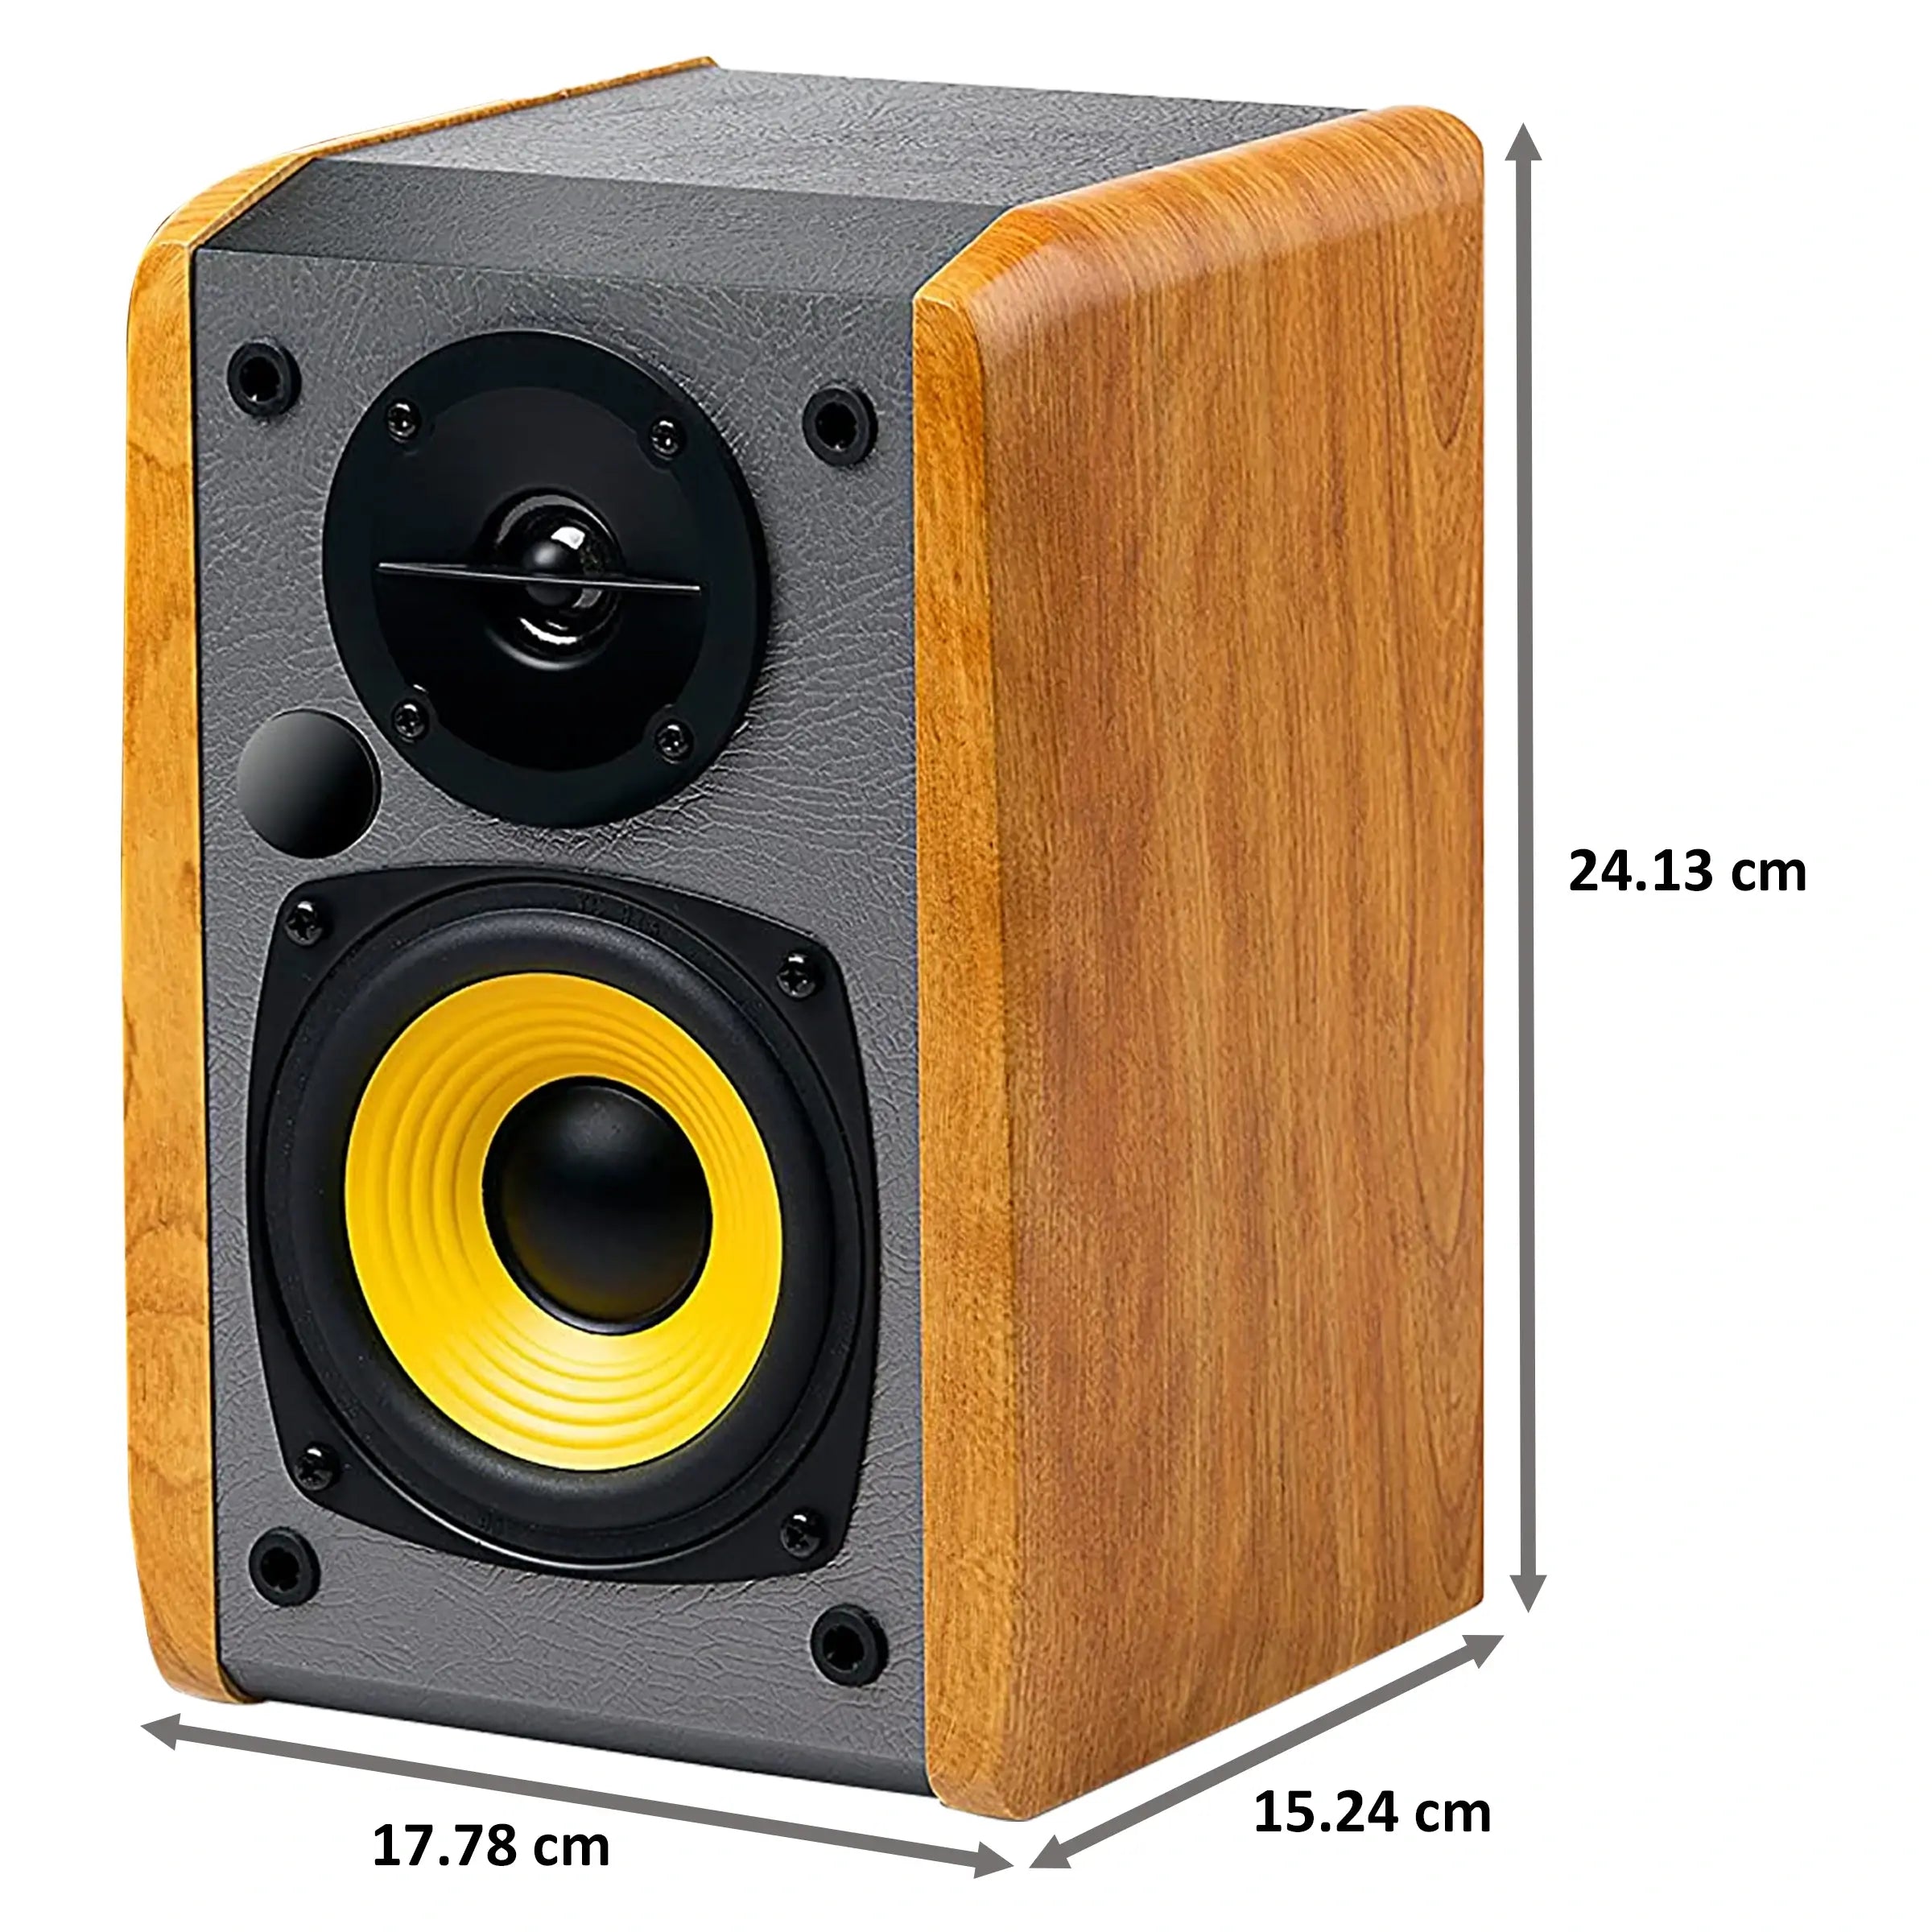 Buy Edifier R1010BT (Wooden) Speaker Bluetooth at HiFiNage in India with warranty.